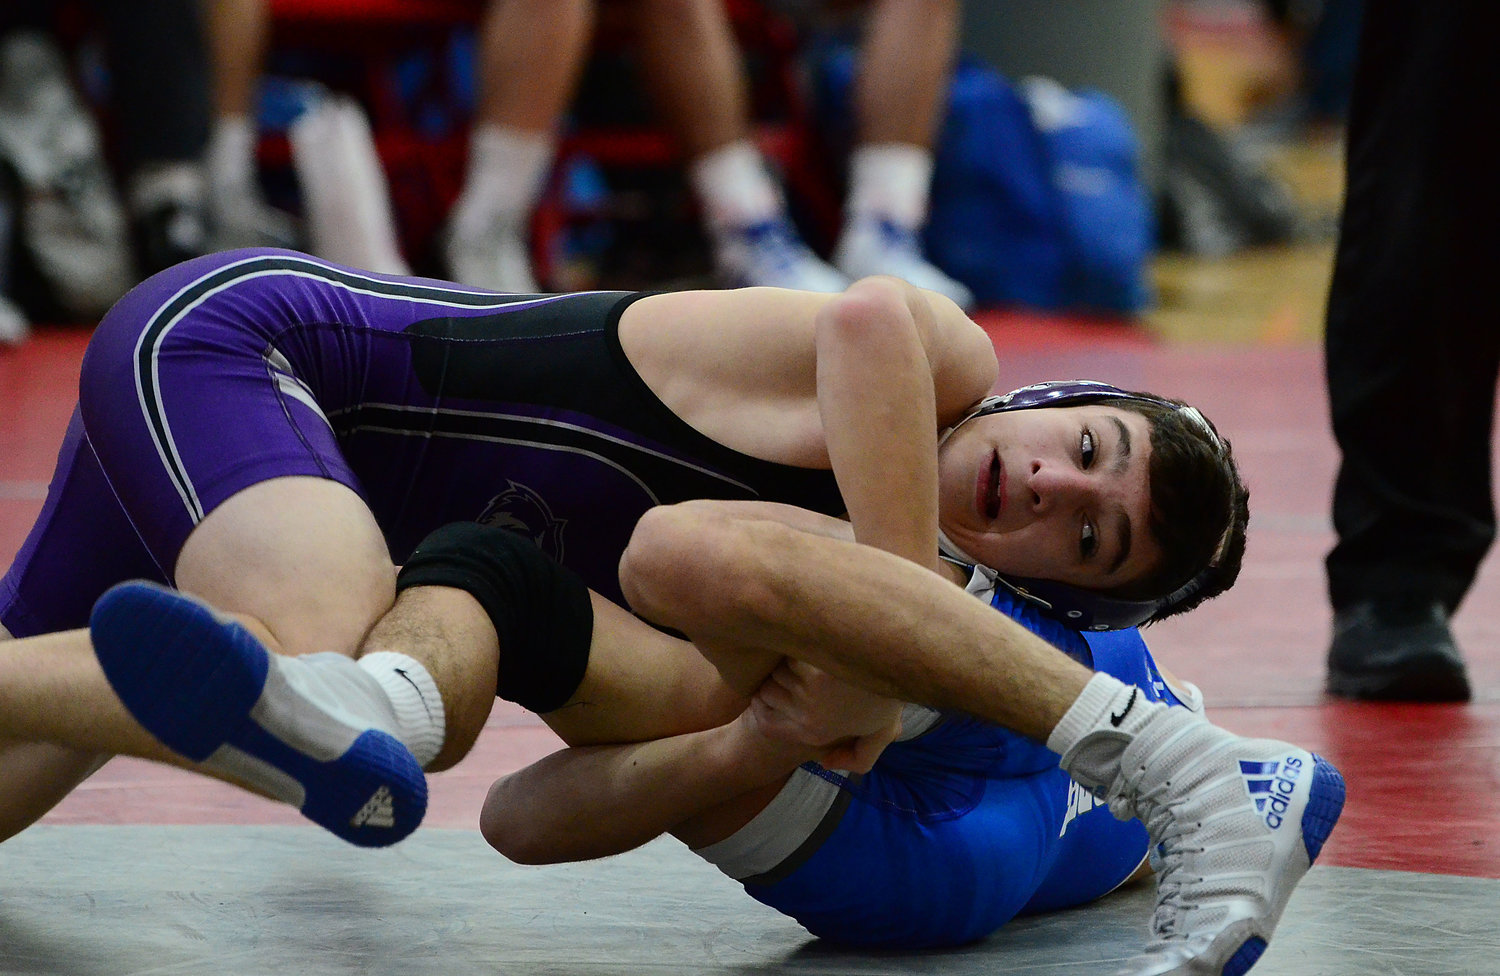 106 pound freshman Carson Correia wraps up the legs of Cumberland’s Corbin Dias during a quad meet at East Providence High School on Monday. Correia went 1-2 during the meet, losing decisions to Dias and to Hope’s Nicholas Torres and winning a decision over Sean Sullivan of East Providence.